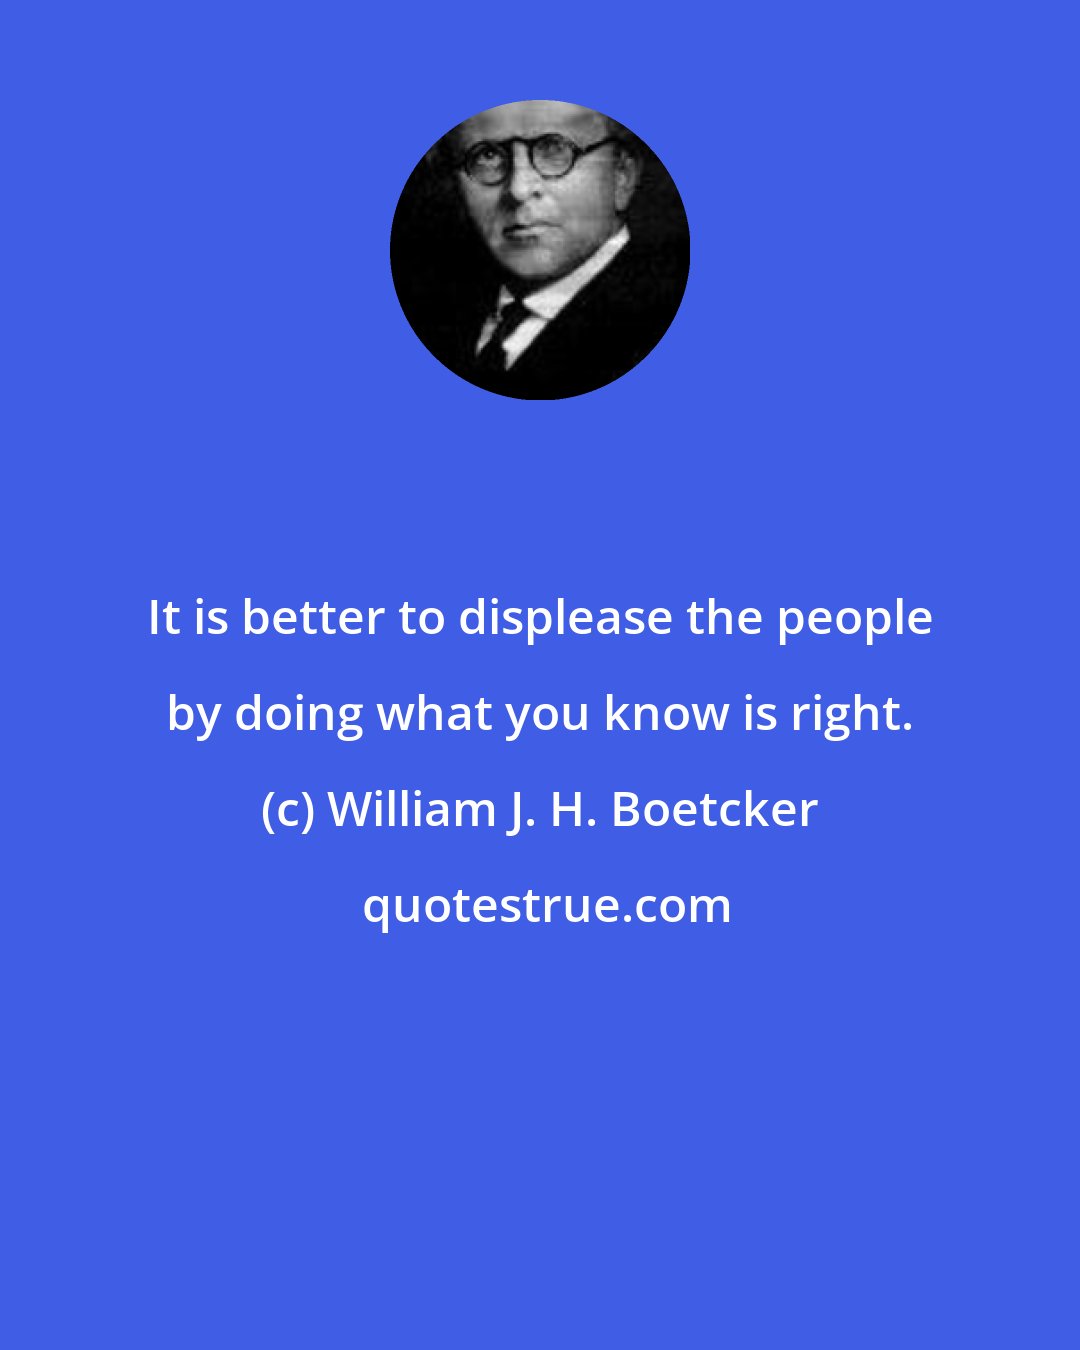 William J. H. Boetcker: It is better to displease the people by doing what you know is right.